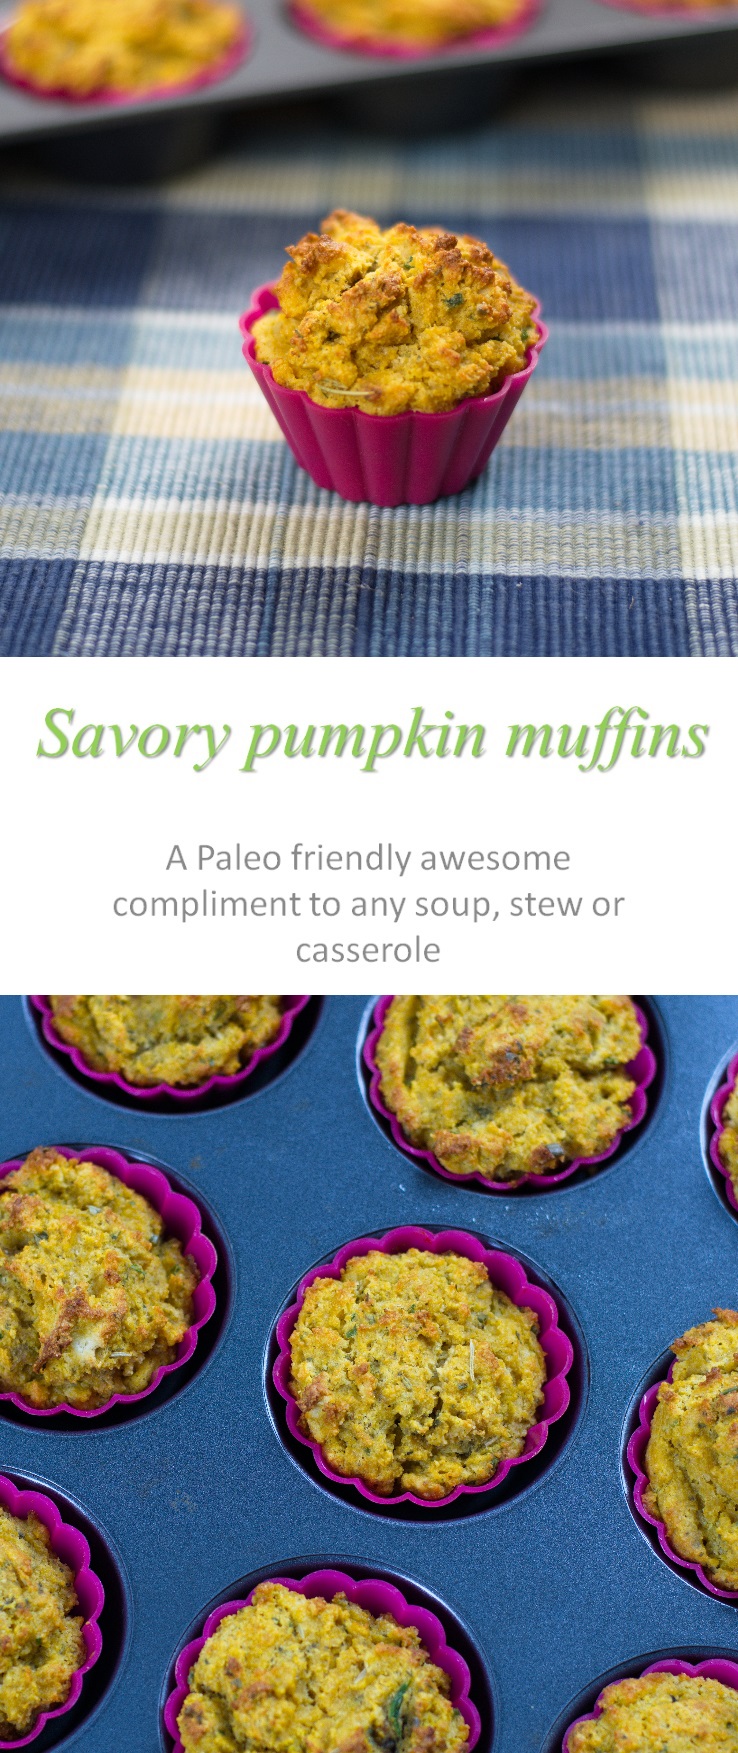 Paleo-friendly savory pumpkin muffins that can be served with casseroles, soups, stews, or just eaten by themselves! #pumpkin